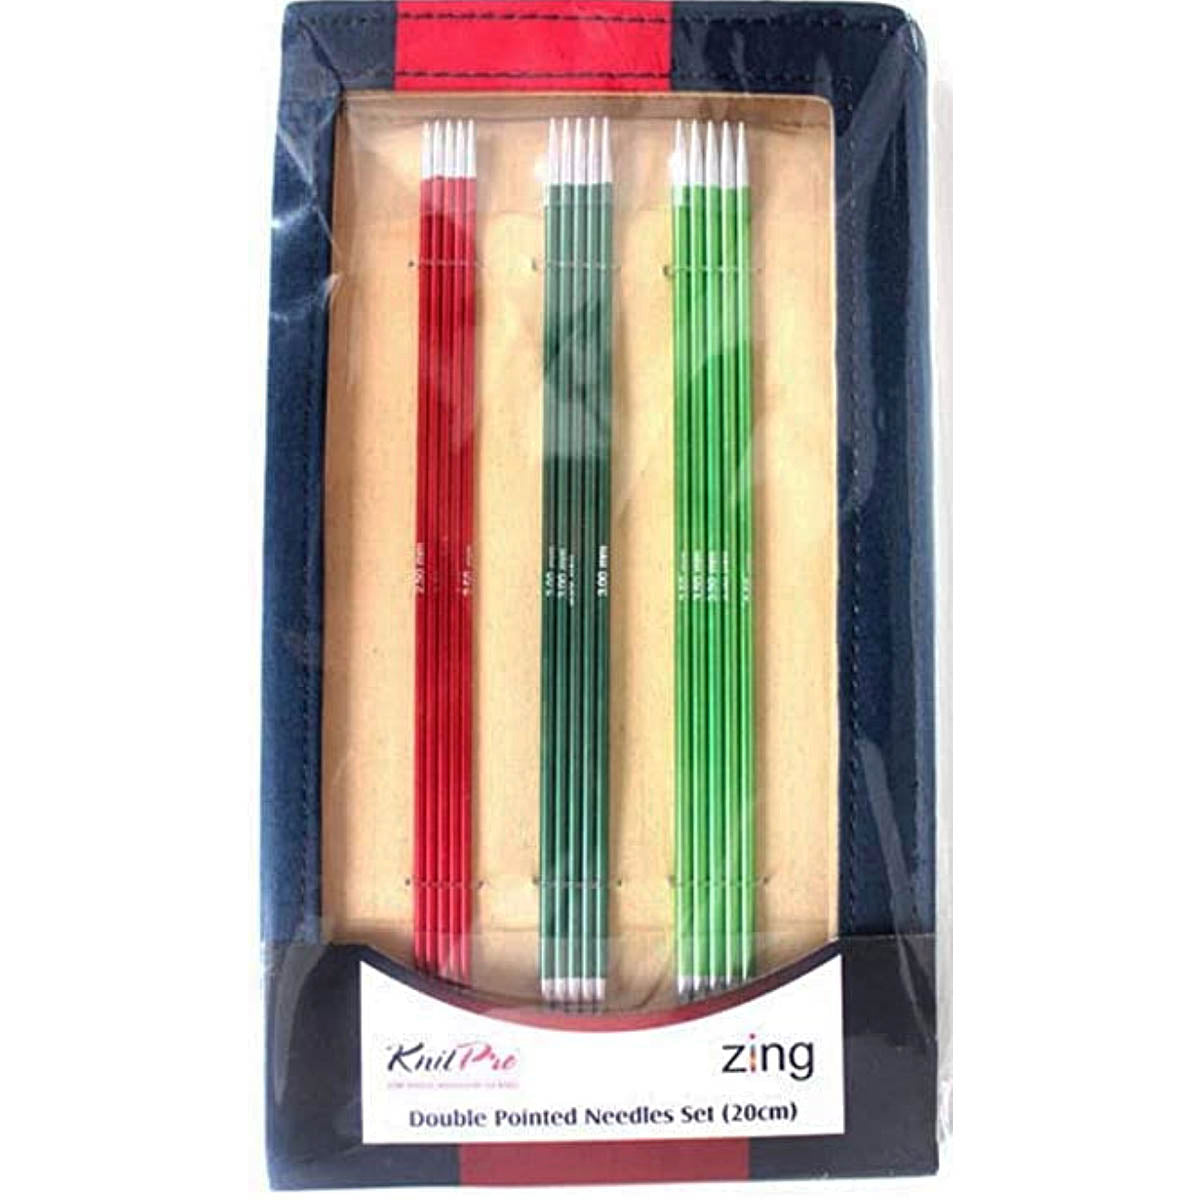 KnitPro ZING Double Point Set of Knitting Needles 15cm or 20cm Short for Small Projects